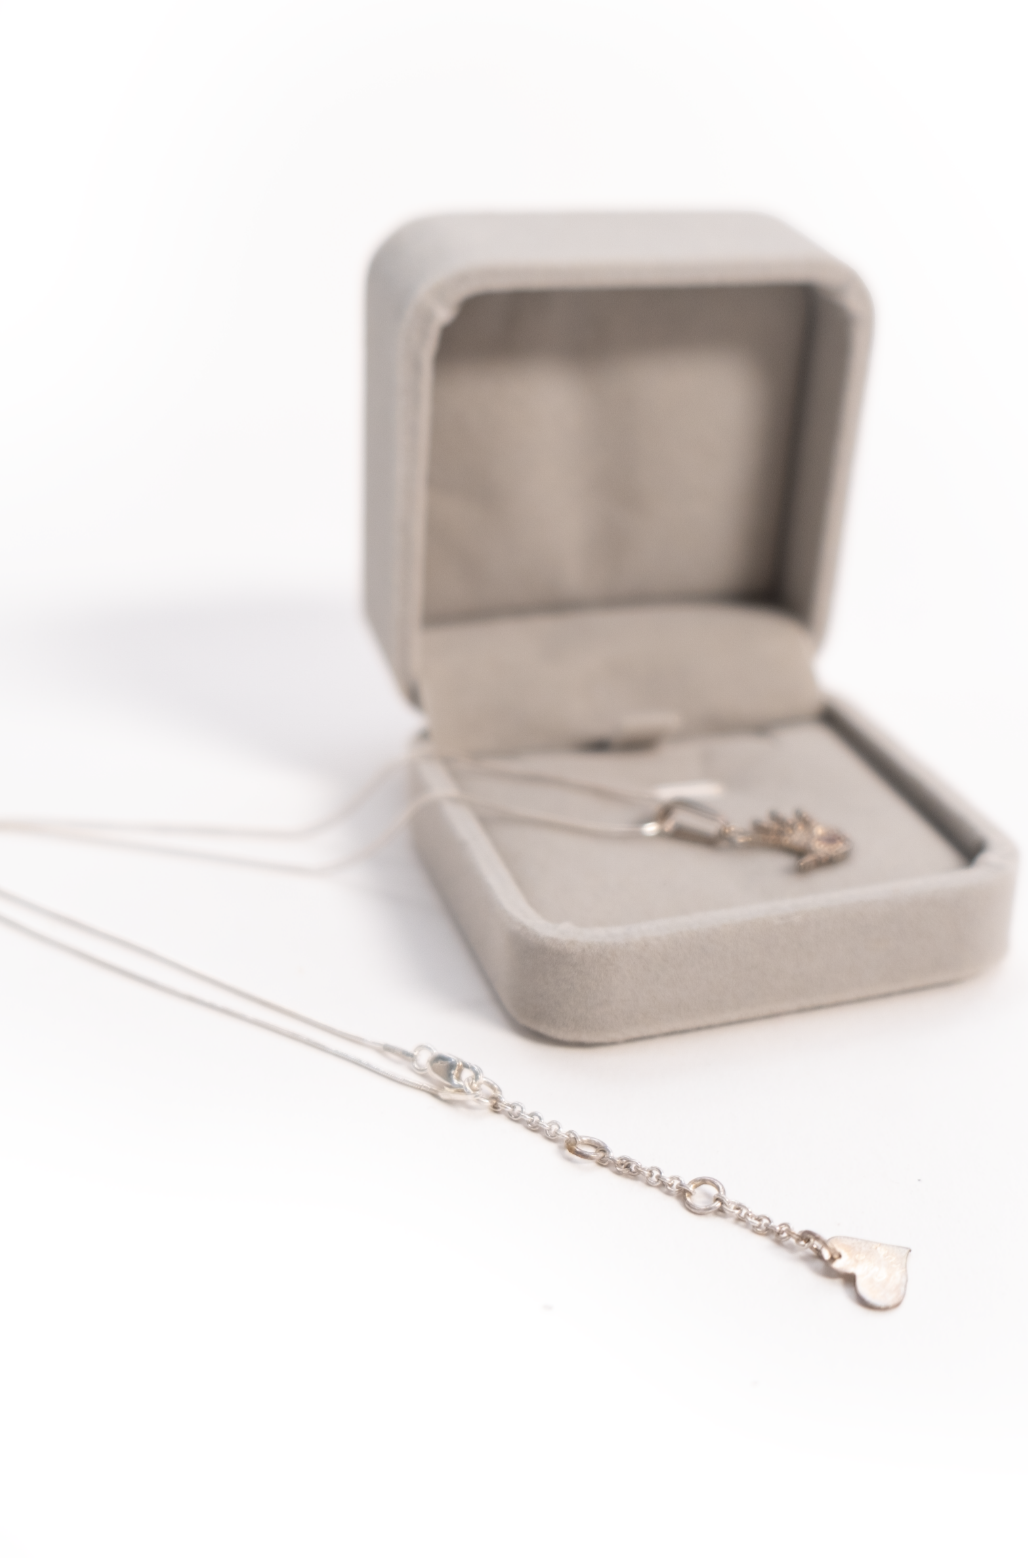 Care Trust Silver Necklace with Tourmaline Stone